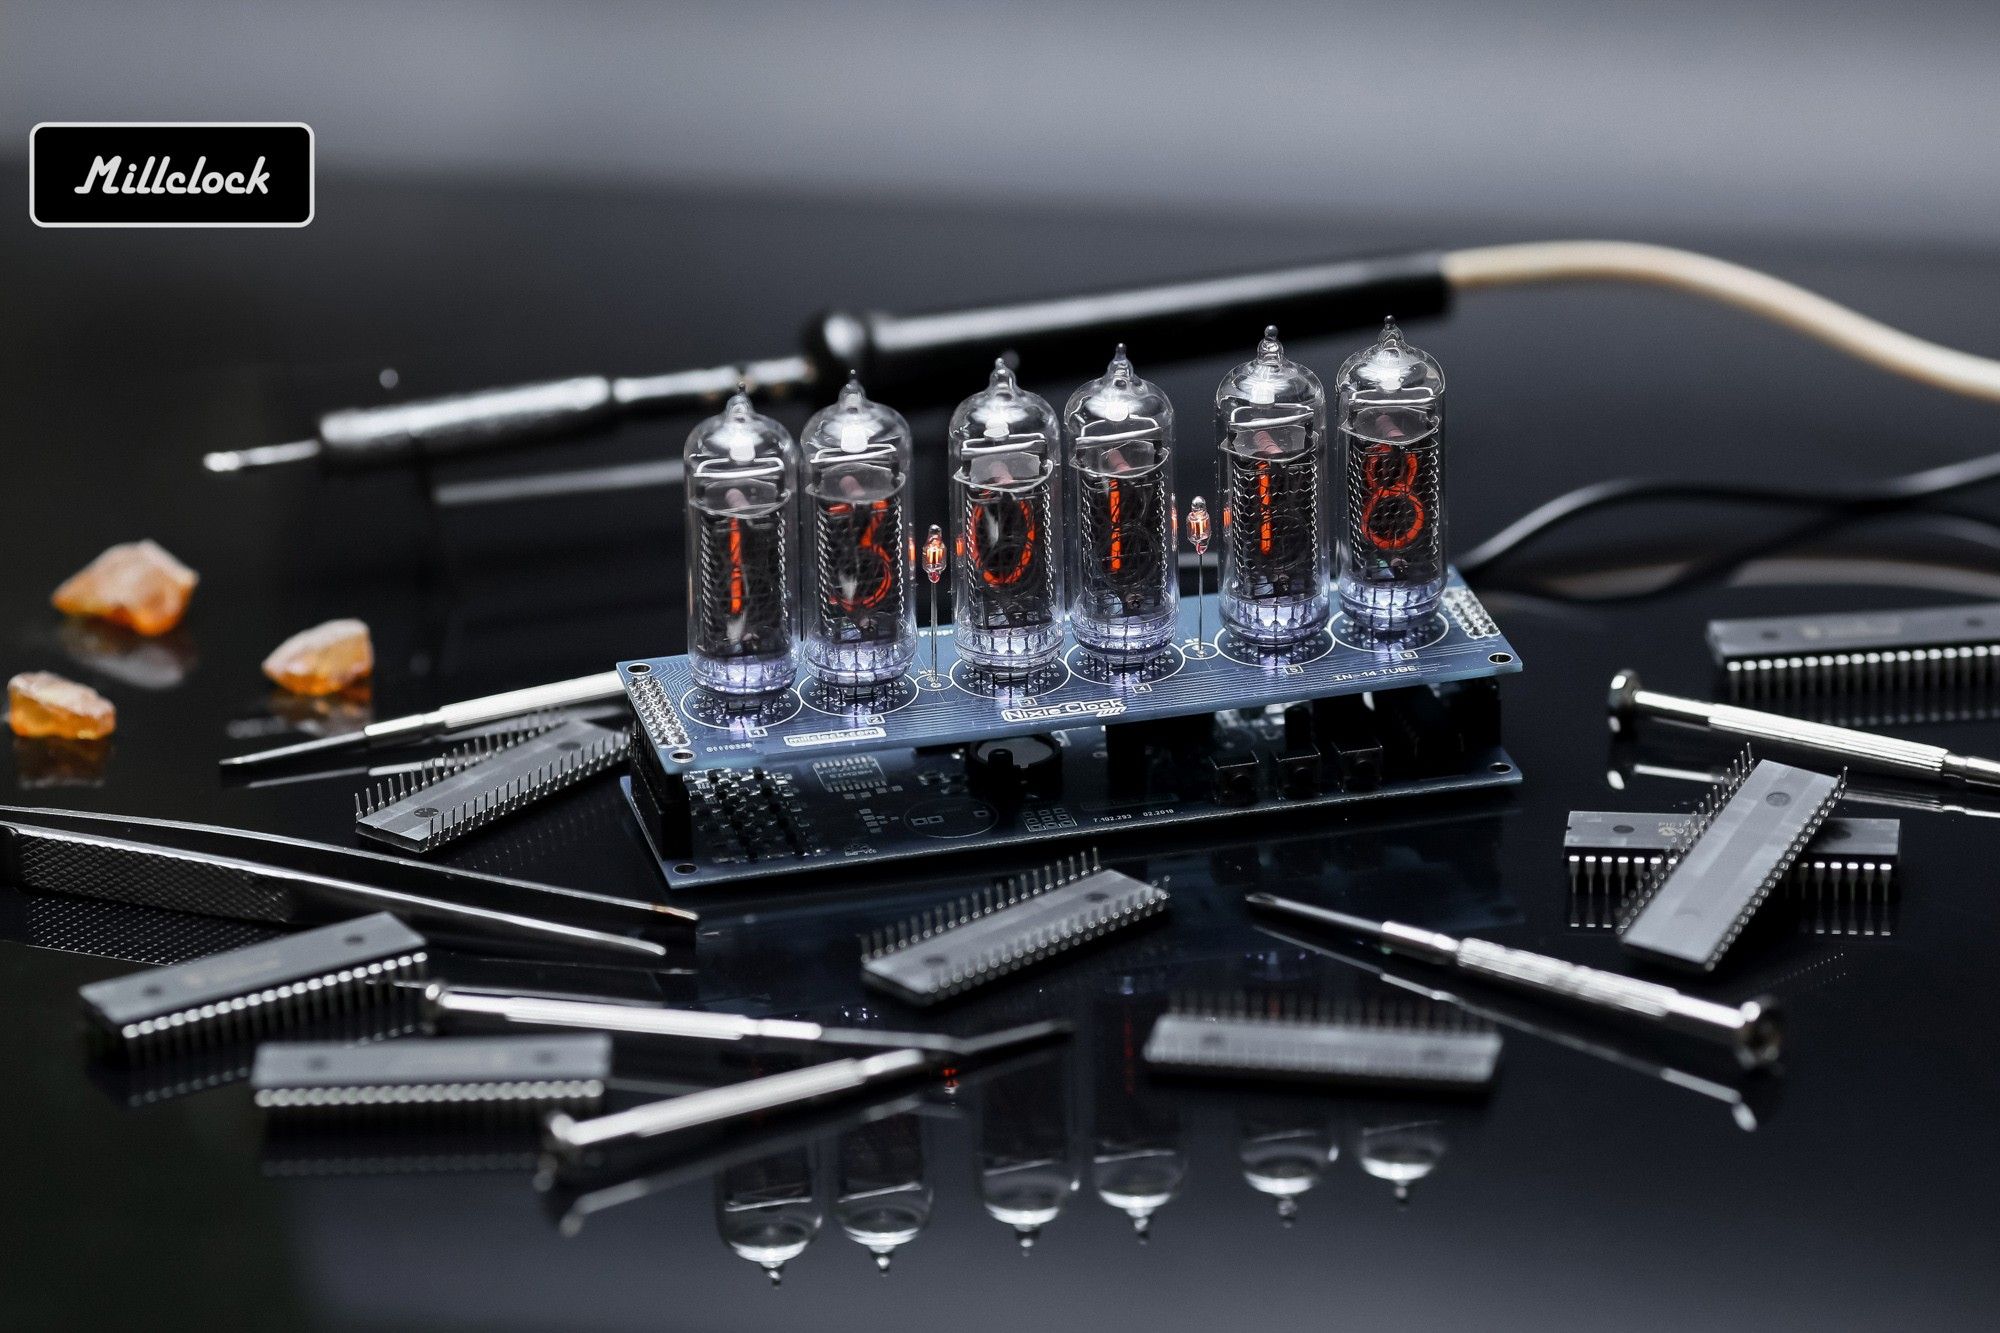 Nixie tube clock, include IN-14 tubes and plywood case